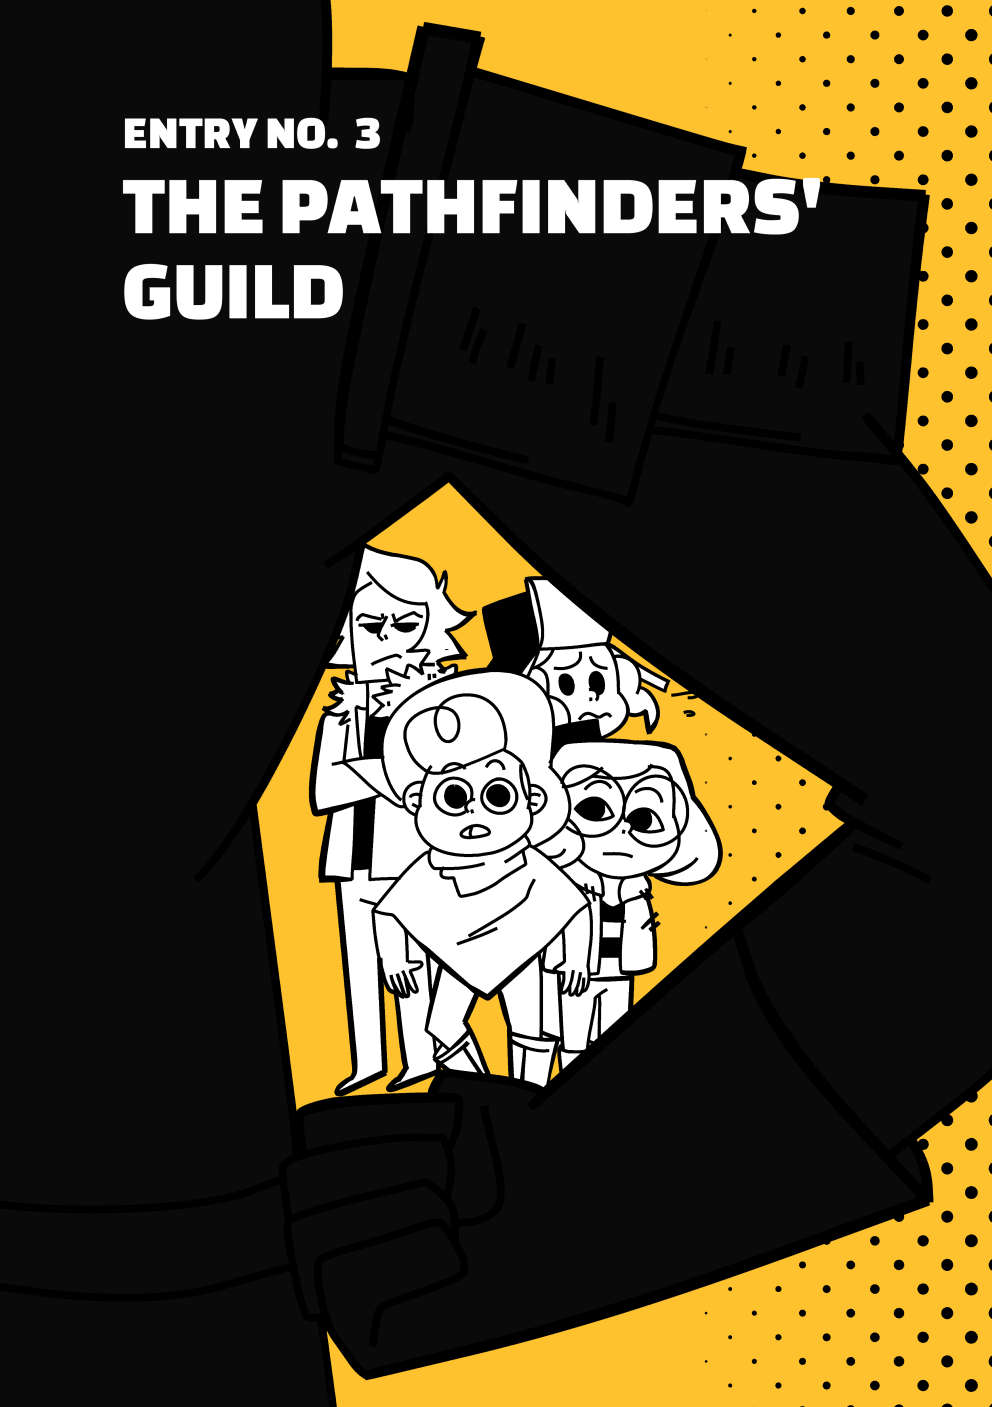 Cover for Fluffy Gang's third chapter titled "The Pathfinders' Guild." A silhouette stands in the foreground with its arms on its sides, as Nate, Vincent, Marissa and Nita look at them from a distance.